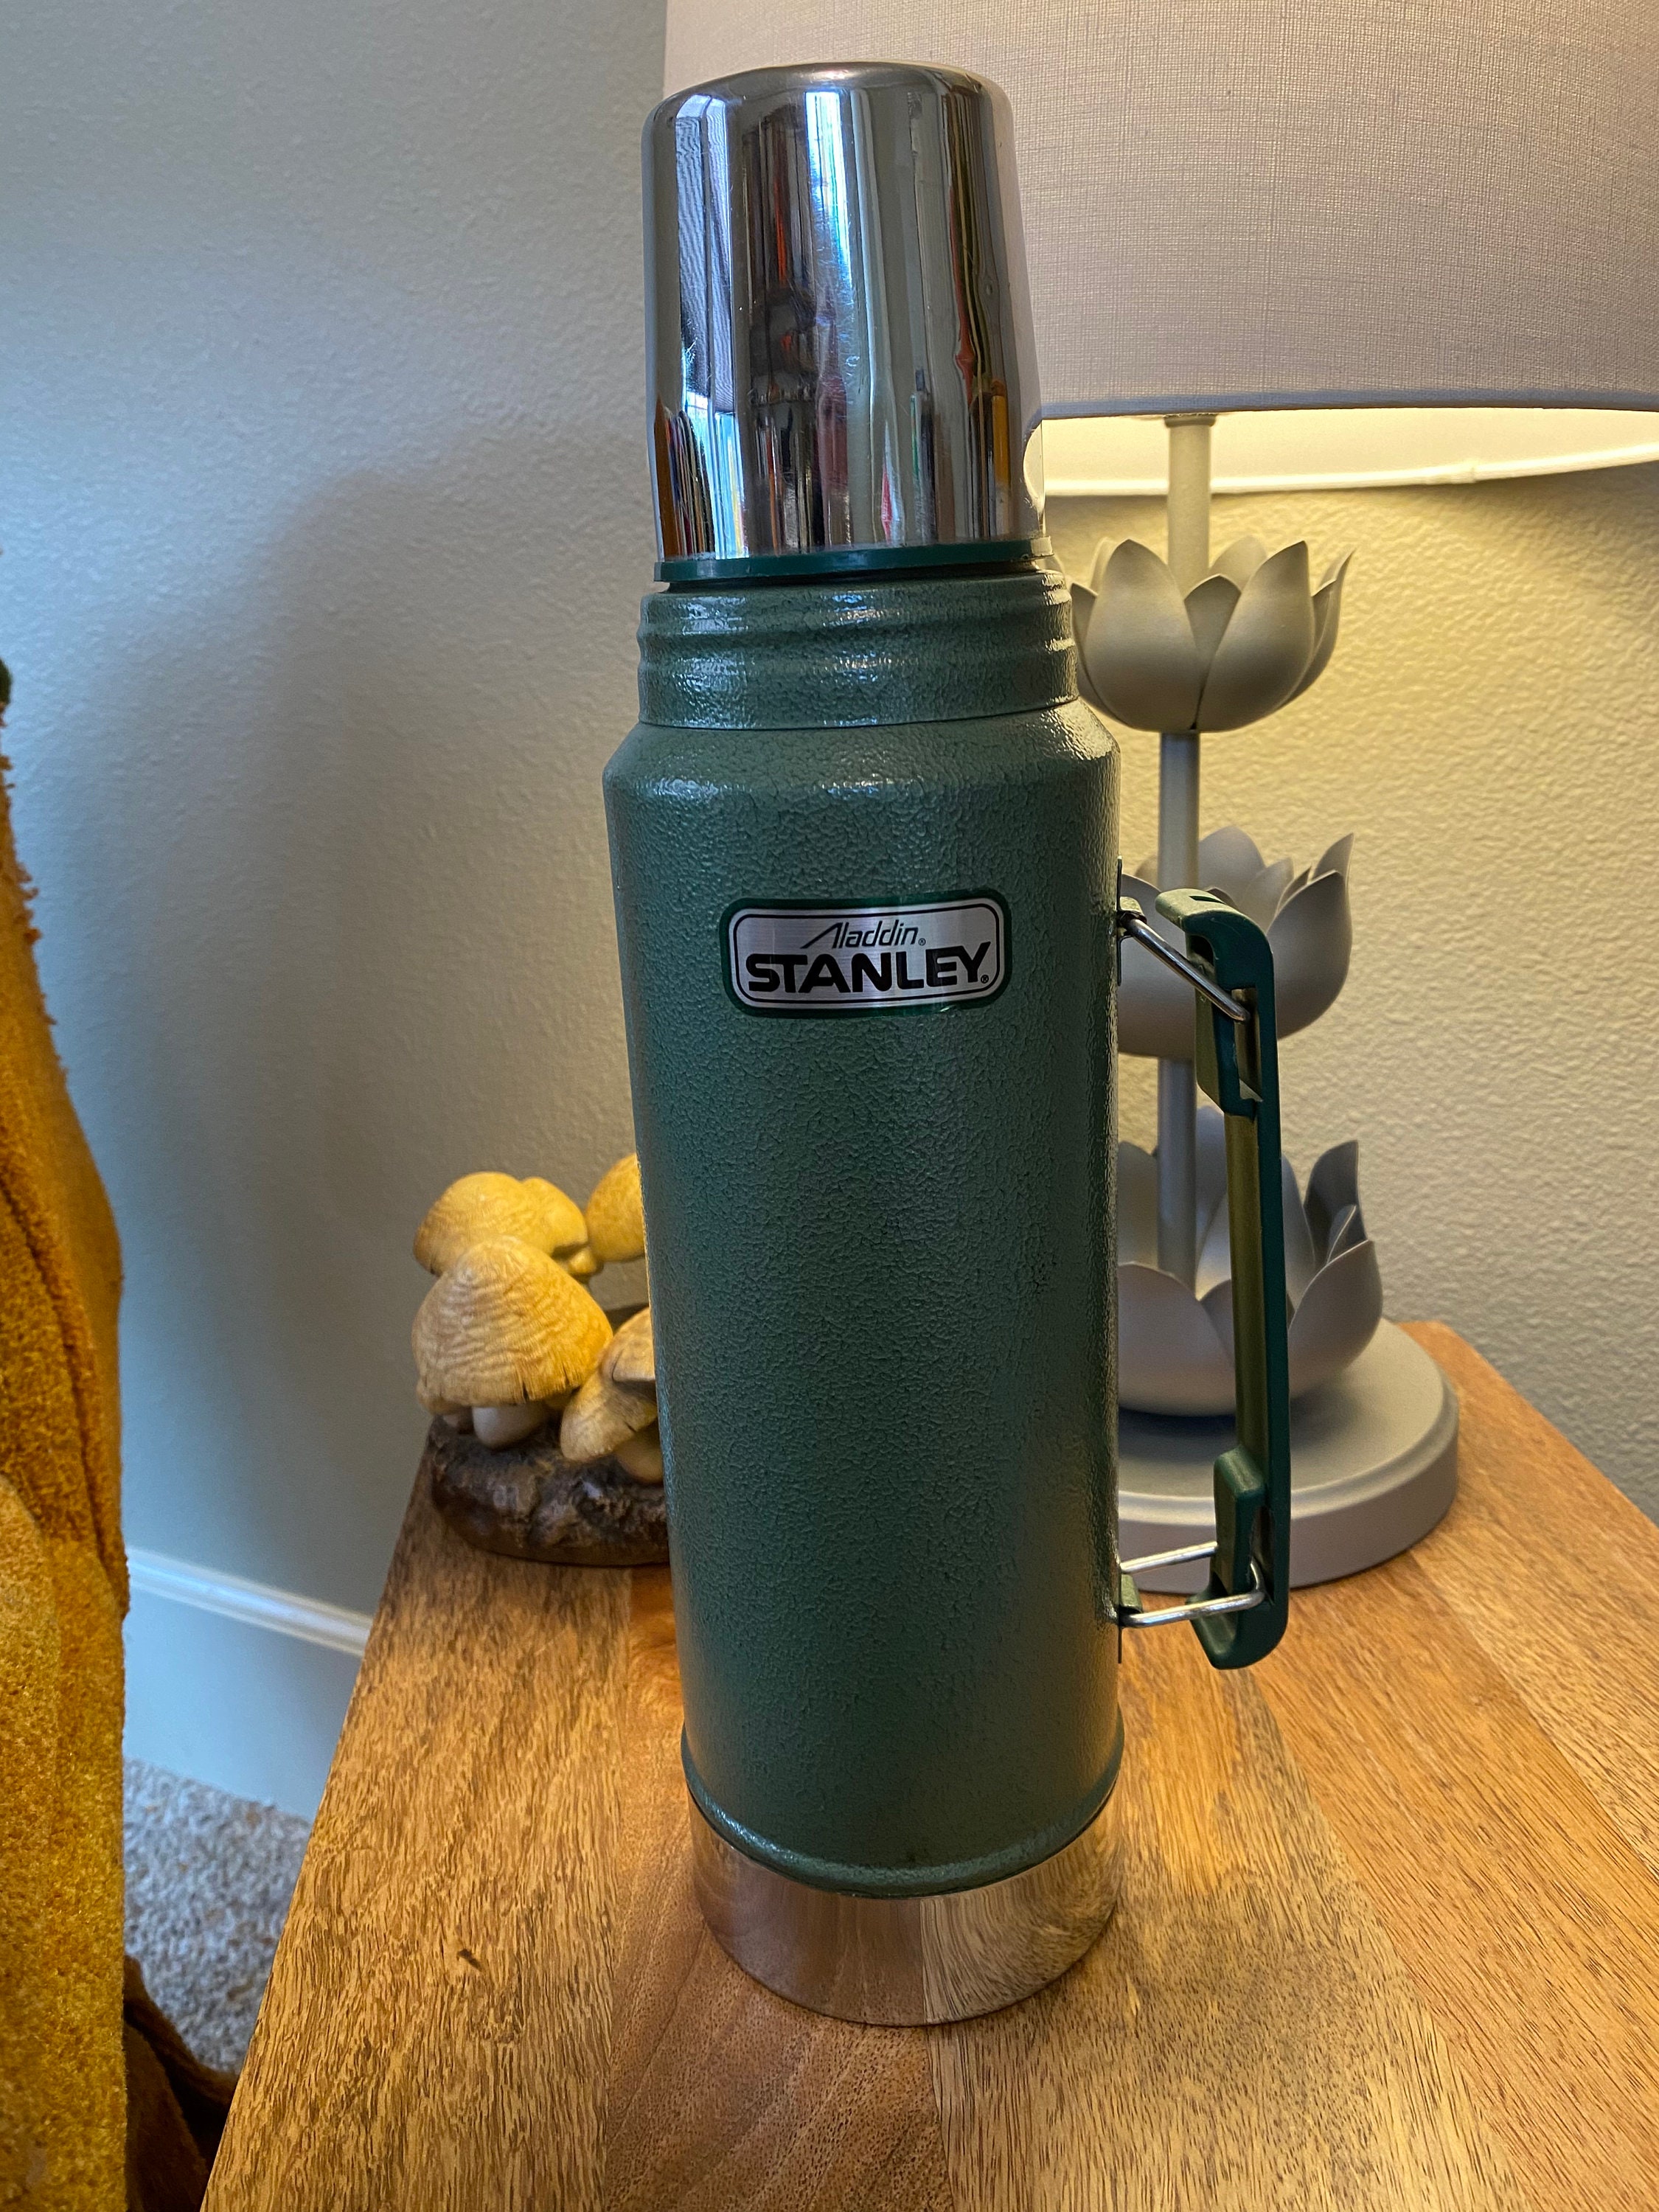 The ORIGINAL STANLEY THERMOS vintage Quart Green COOL